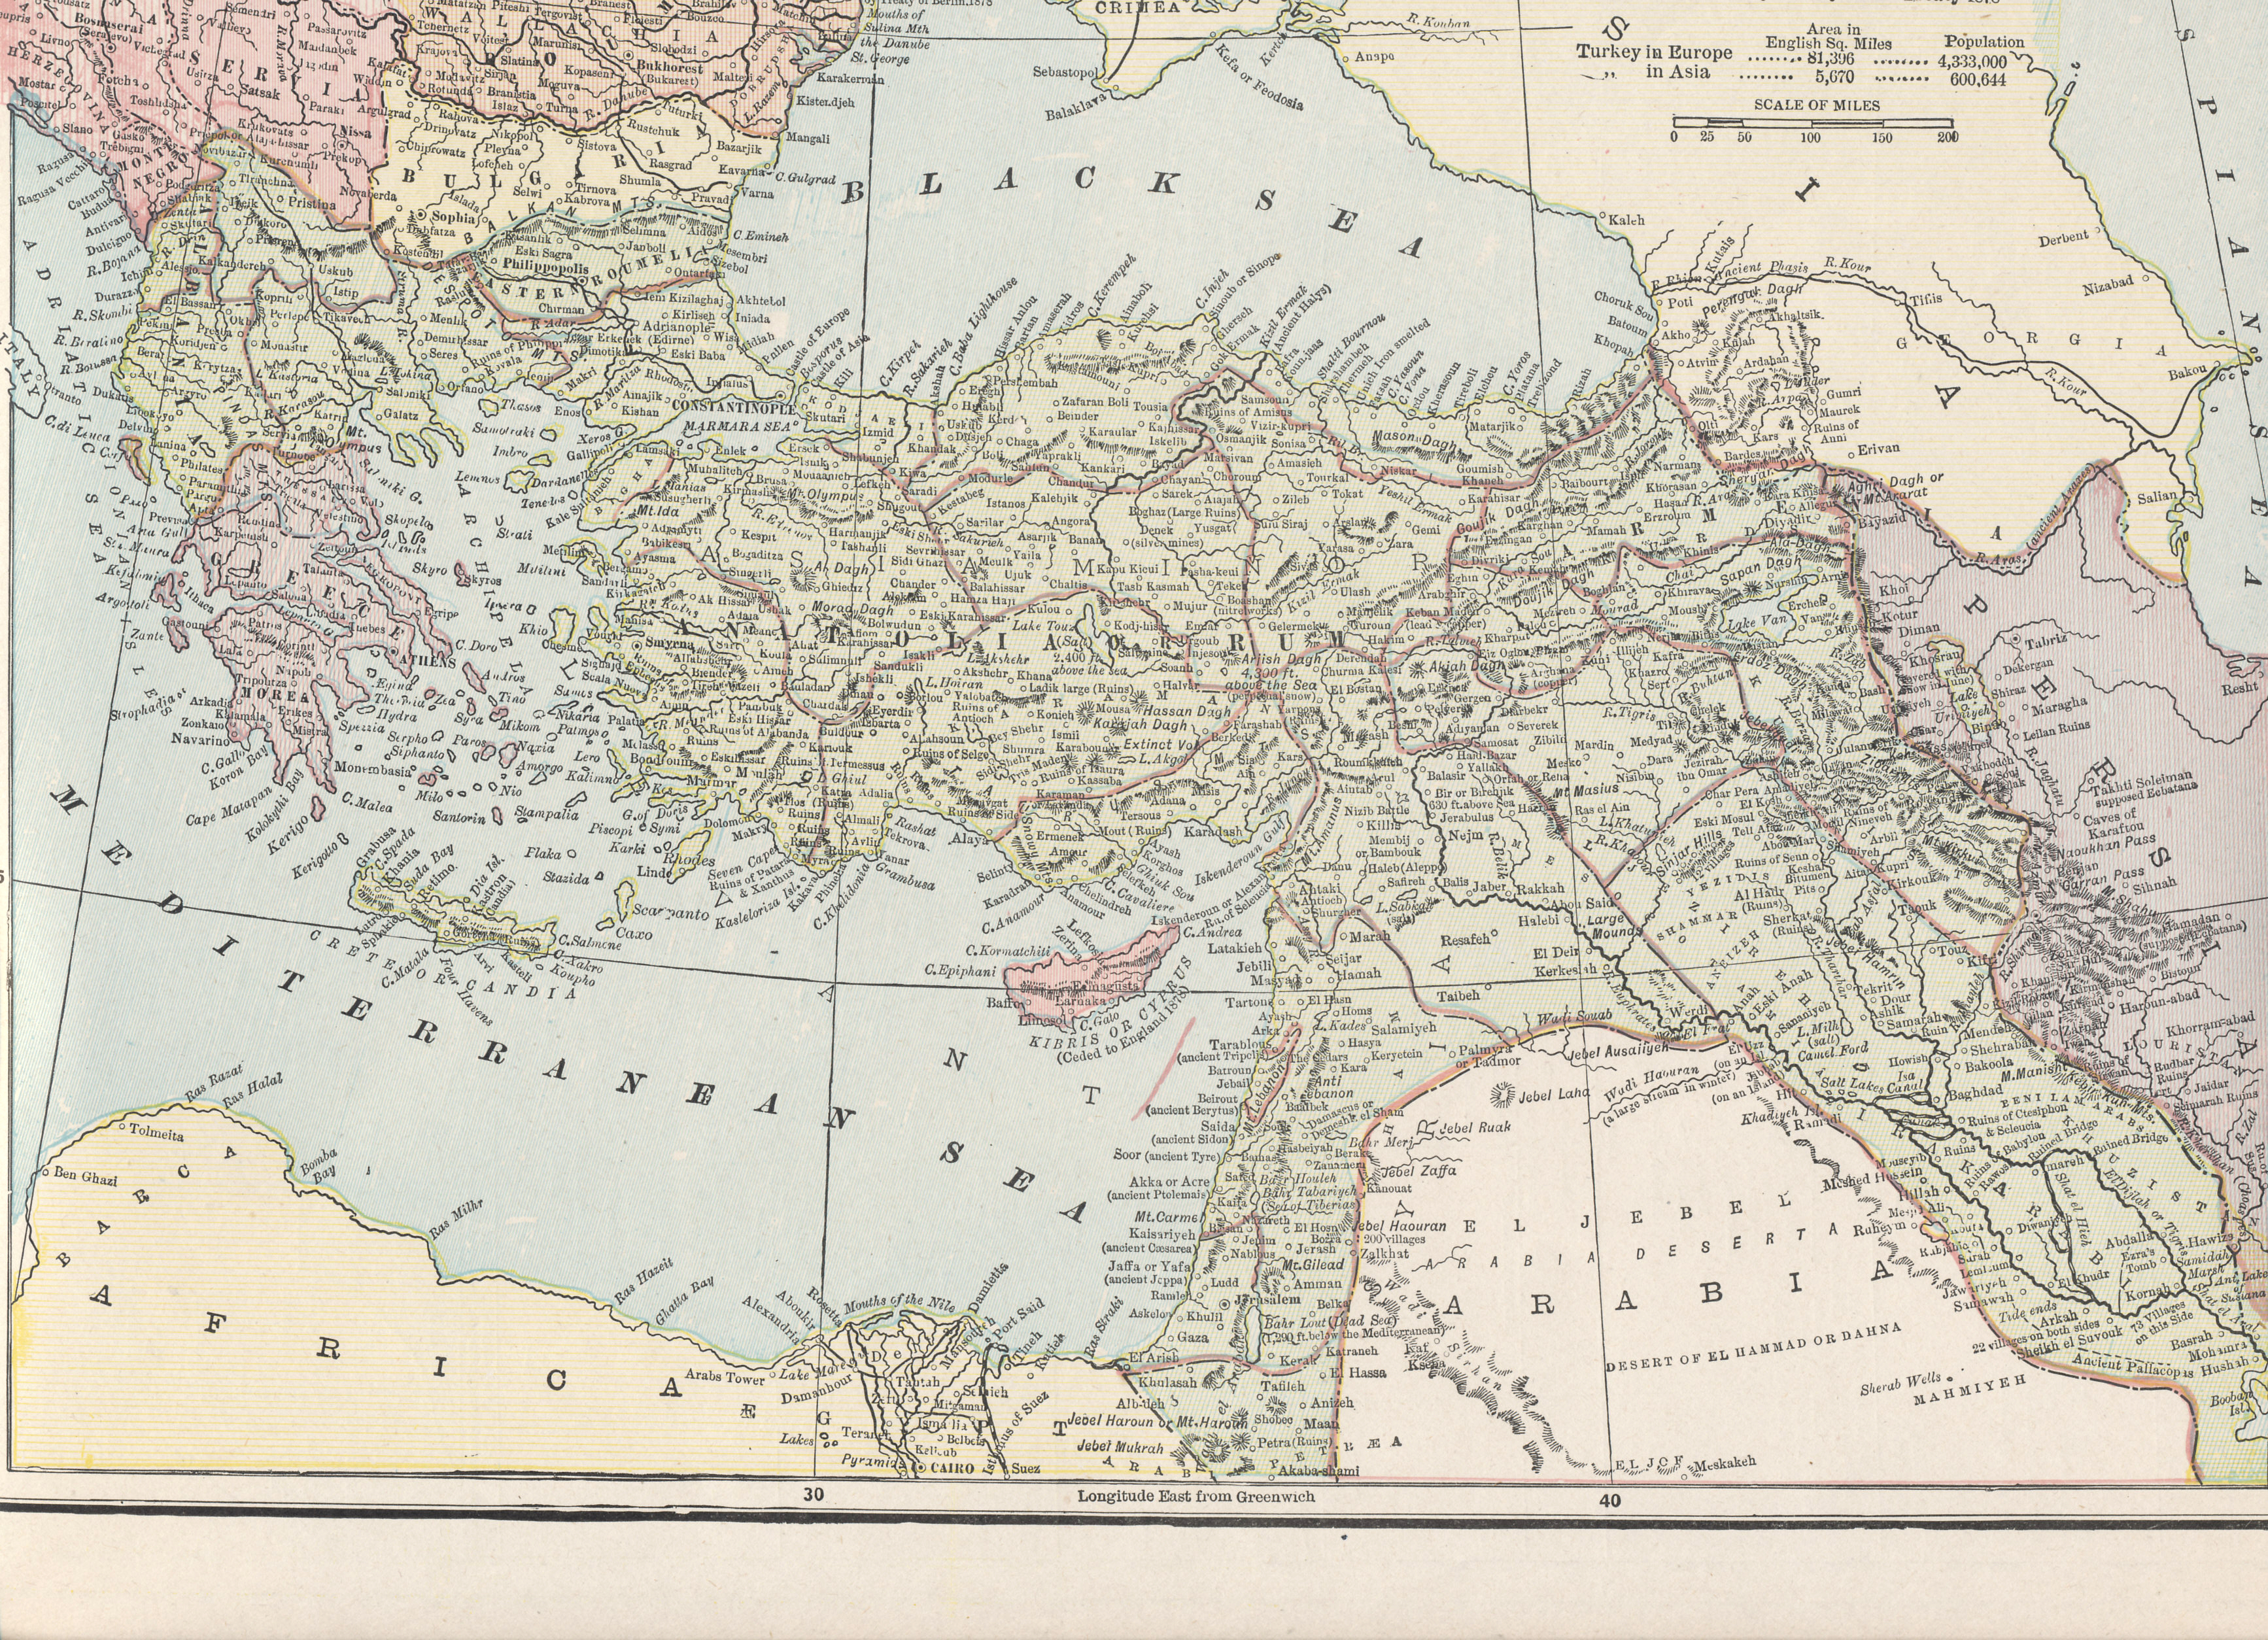 The Turkish (or Ottoman) Empire, from Cram's 1896 Railway Map of the Turkish Empire.